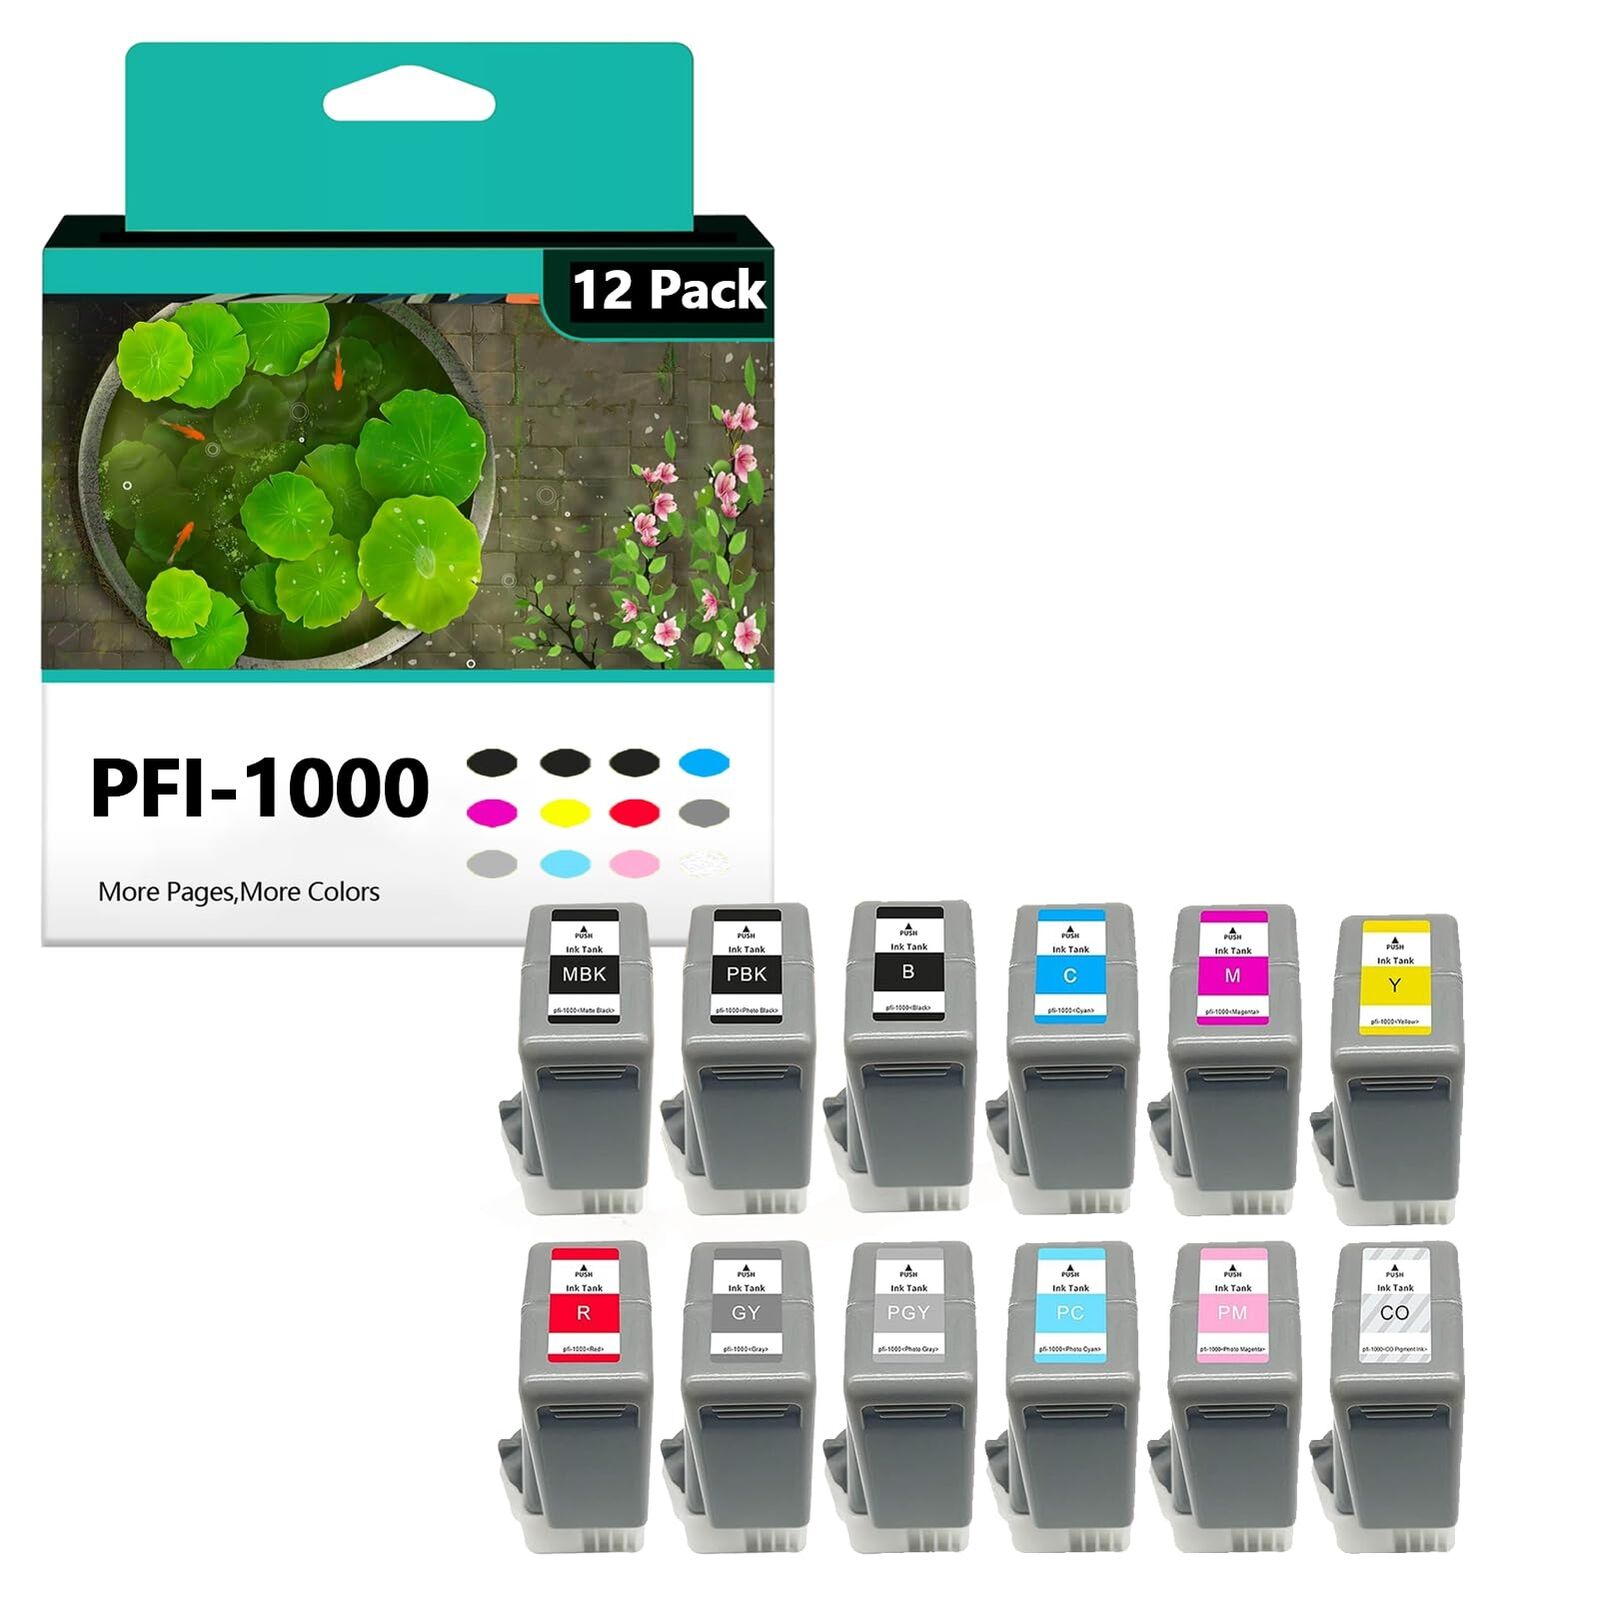 PFI-1000 Ink Cartridges Replacements for Canon ImagePROGRAF PRO-1000 12 Pack